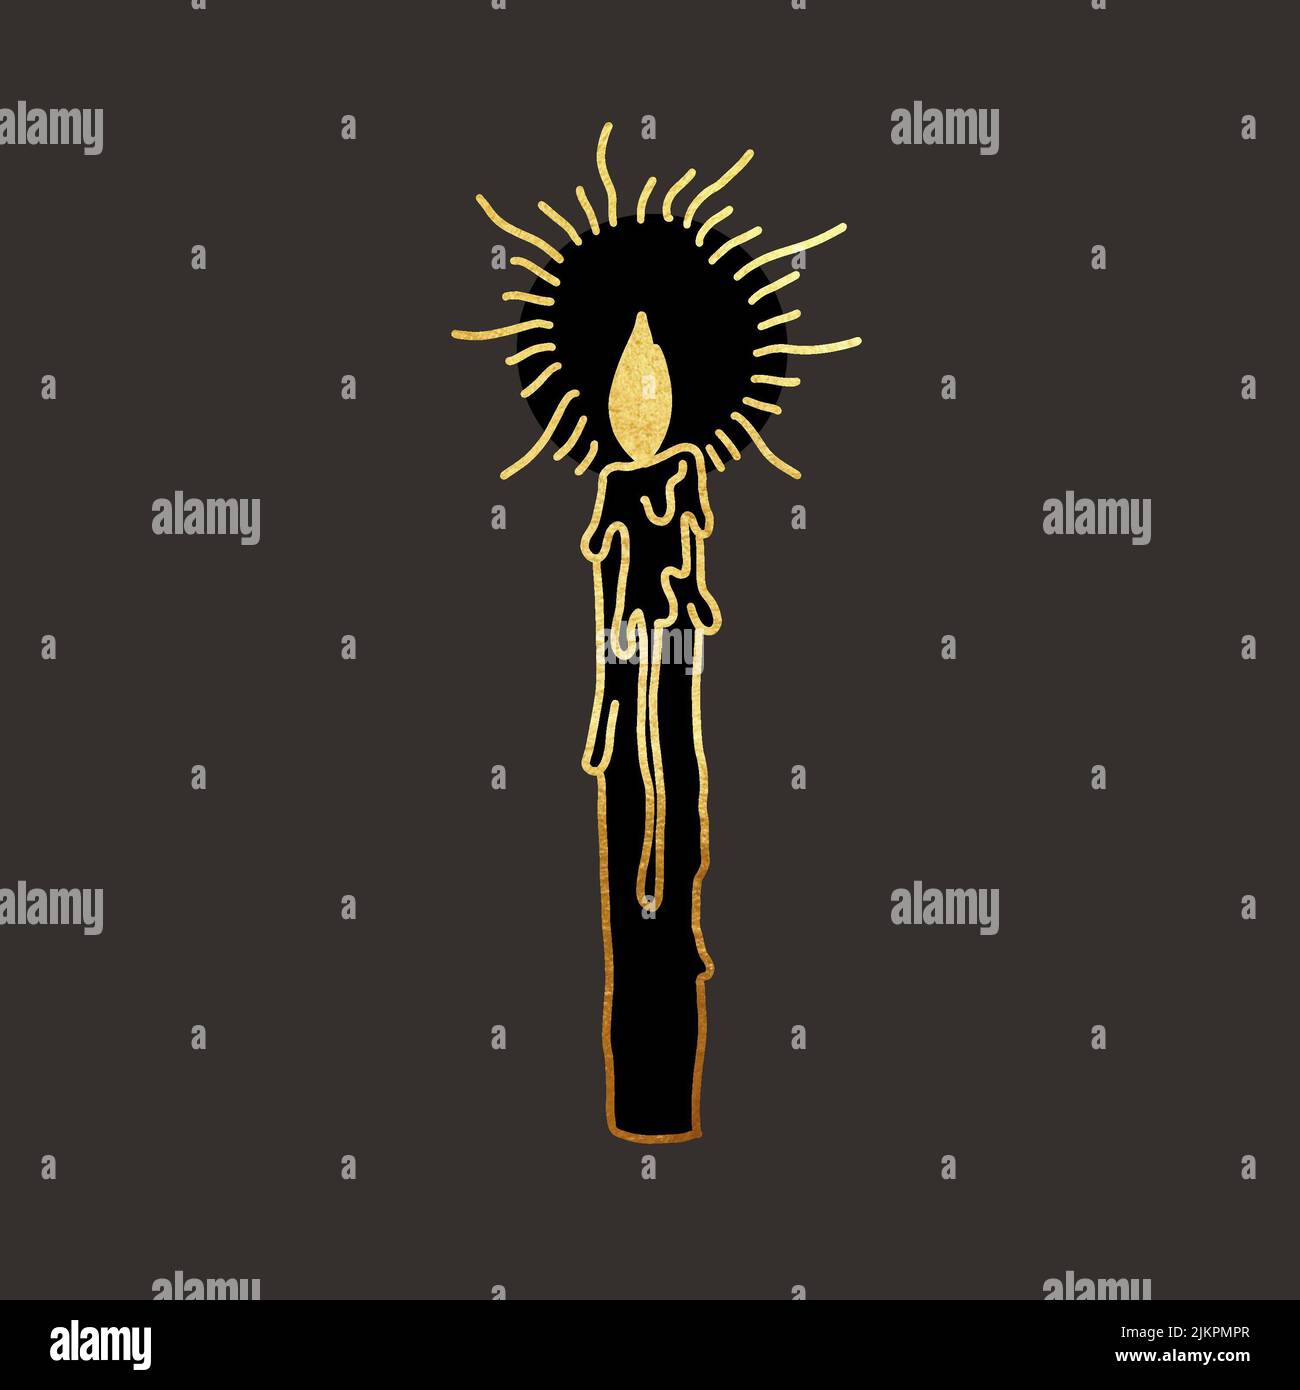 candle. tarot card. graphic illustration with golden lines on a dark background Stock Photo